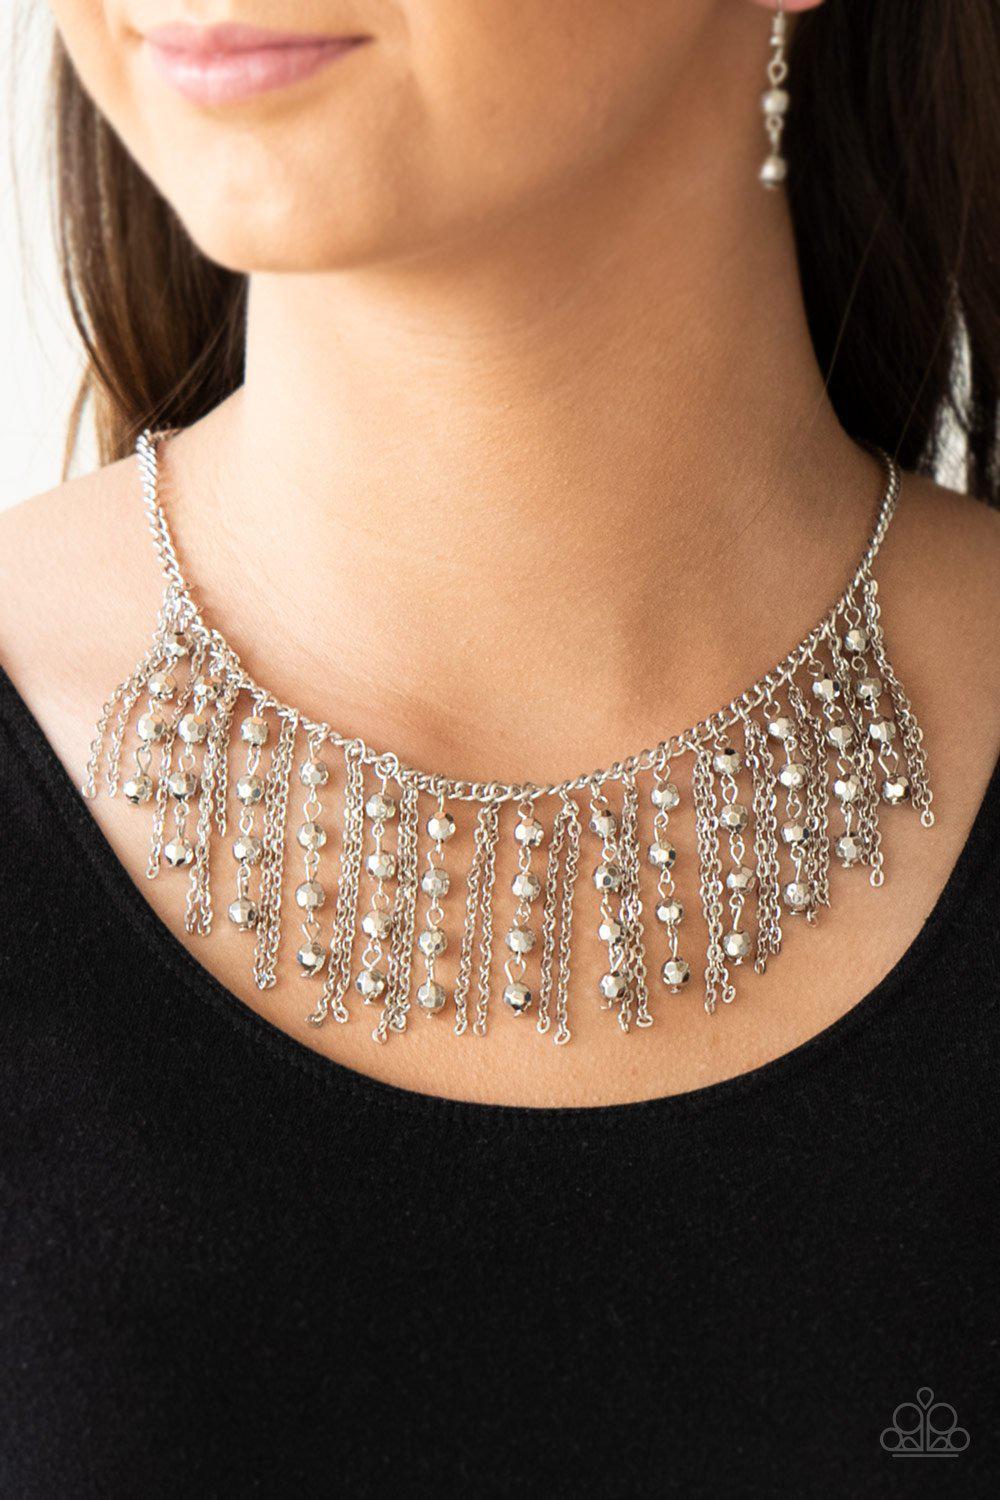 Rebel Remix Silver Fringe Necklace - Paparazzi Accessories- lightbox - CarasShop.com - $5 Jewelry by Cara Jewels